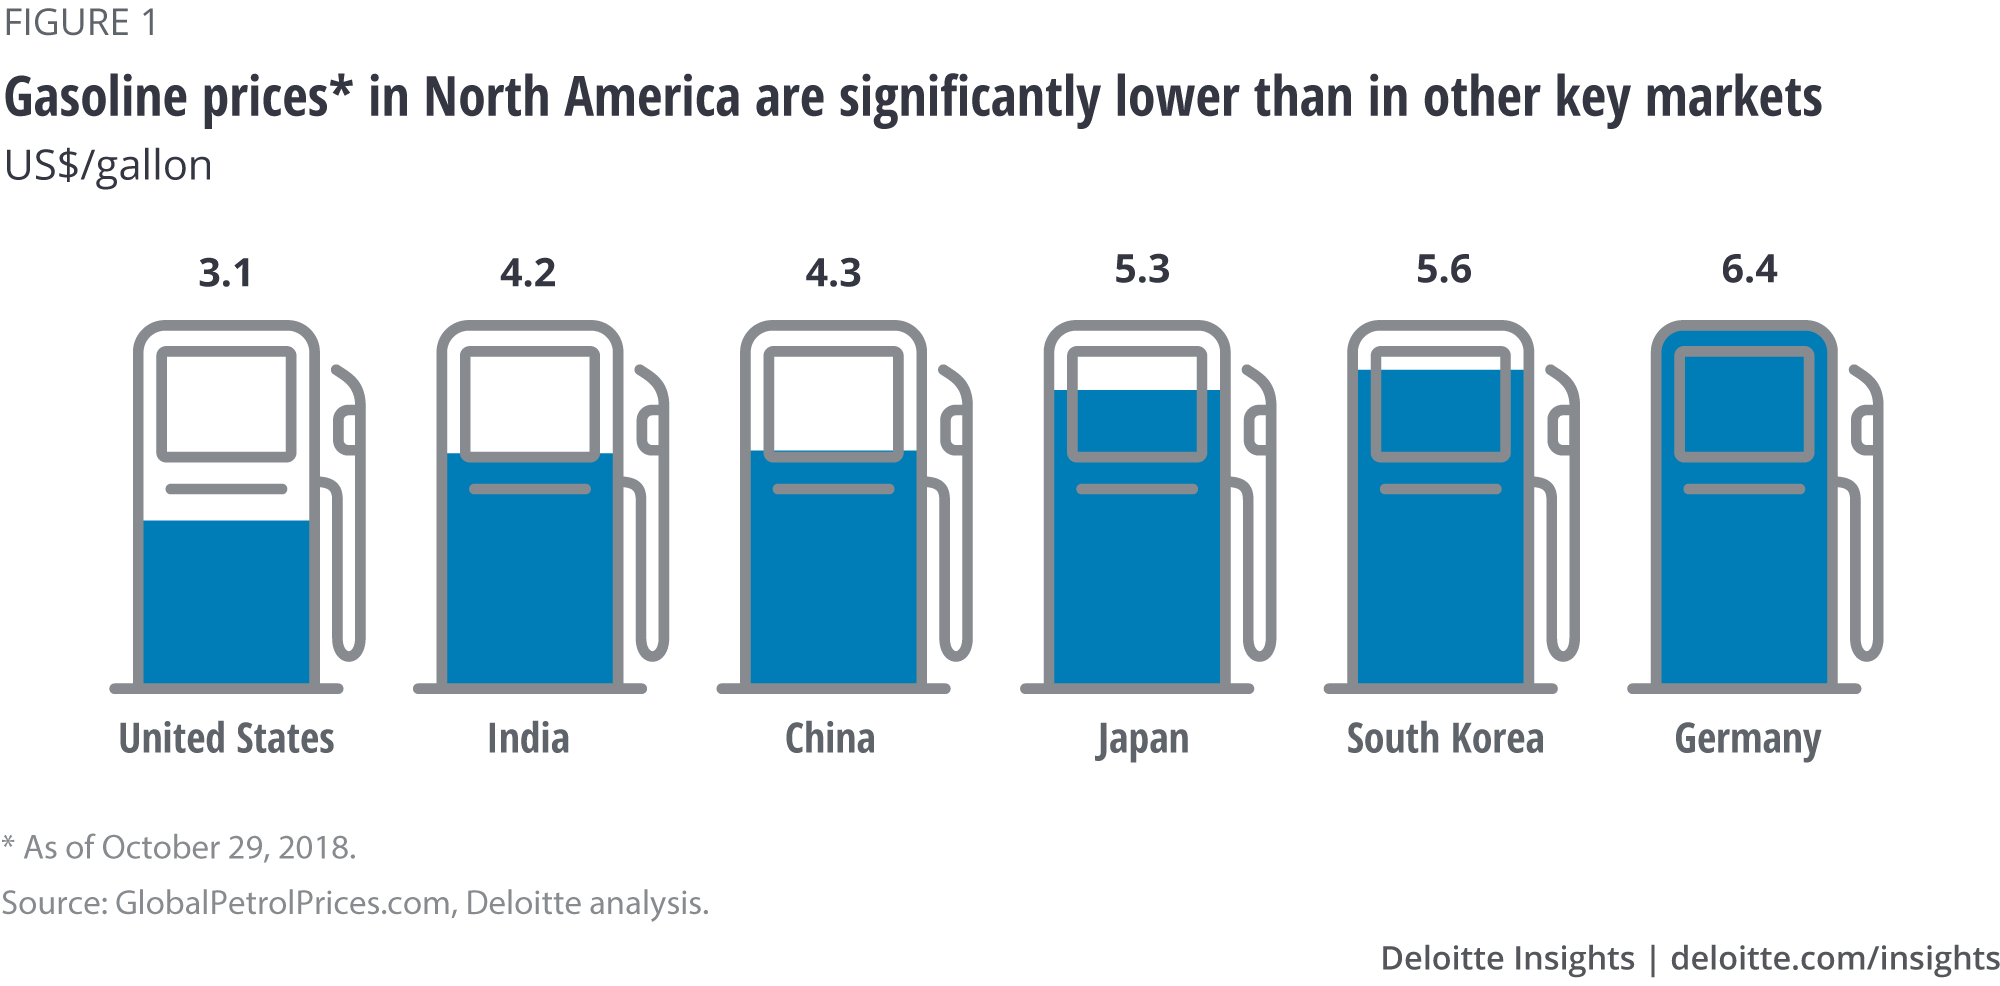 Gasoline prices* in North America are significantly lower than in other key markets